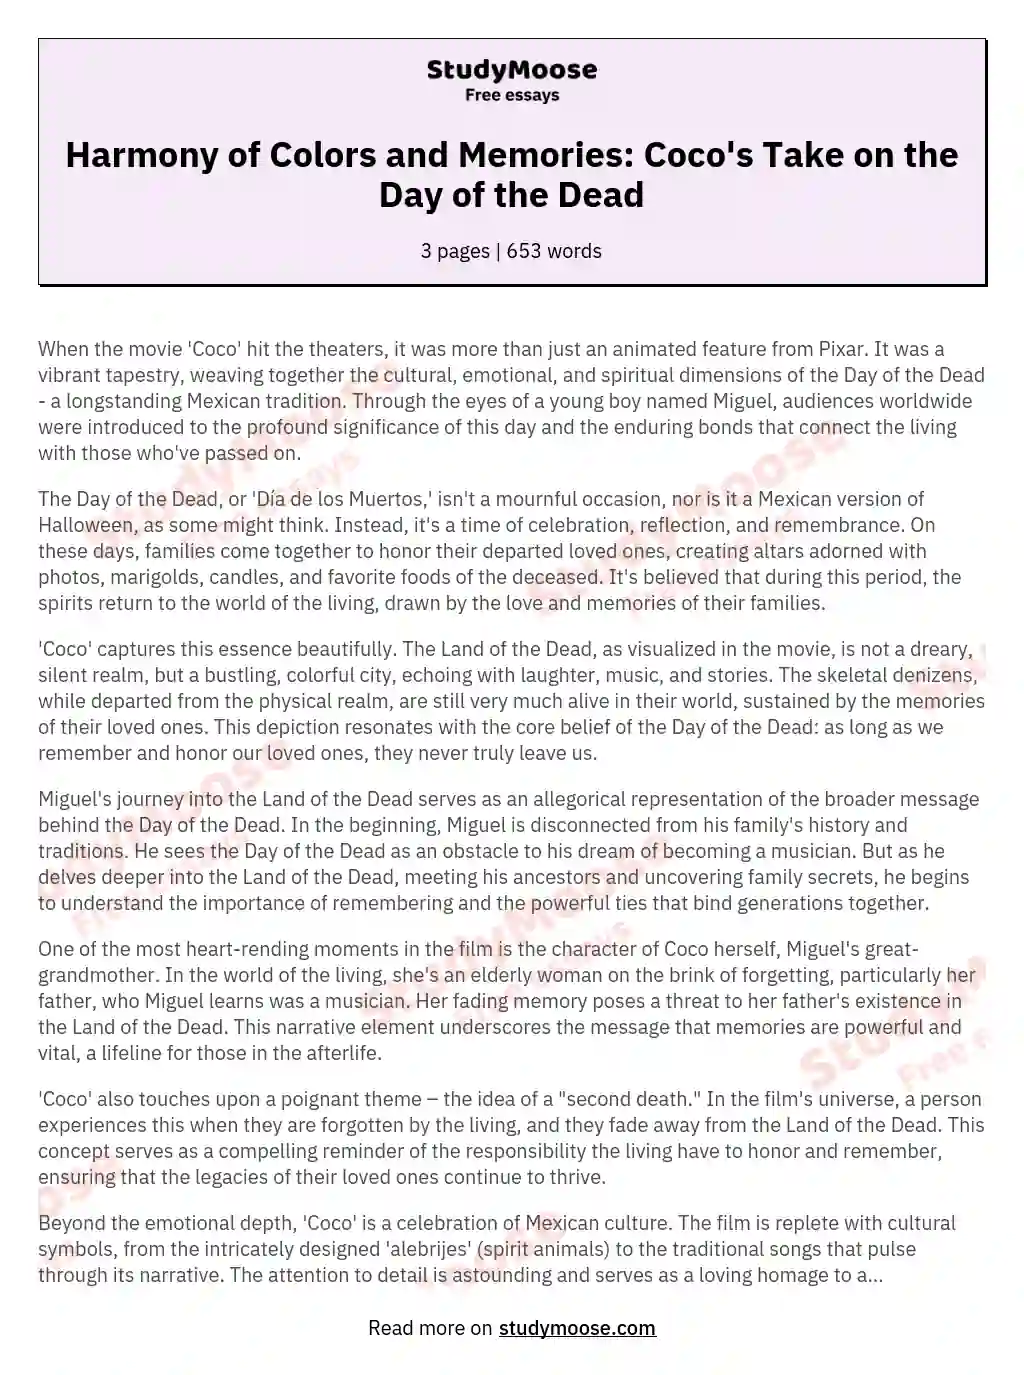 Harmony of Colors and Memories: Coco's Take on the Day of the Dead essay